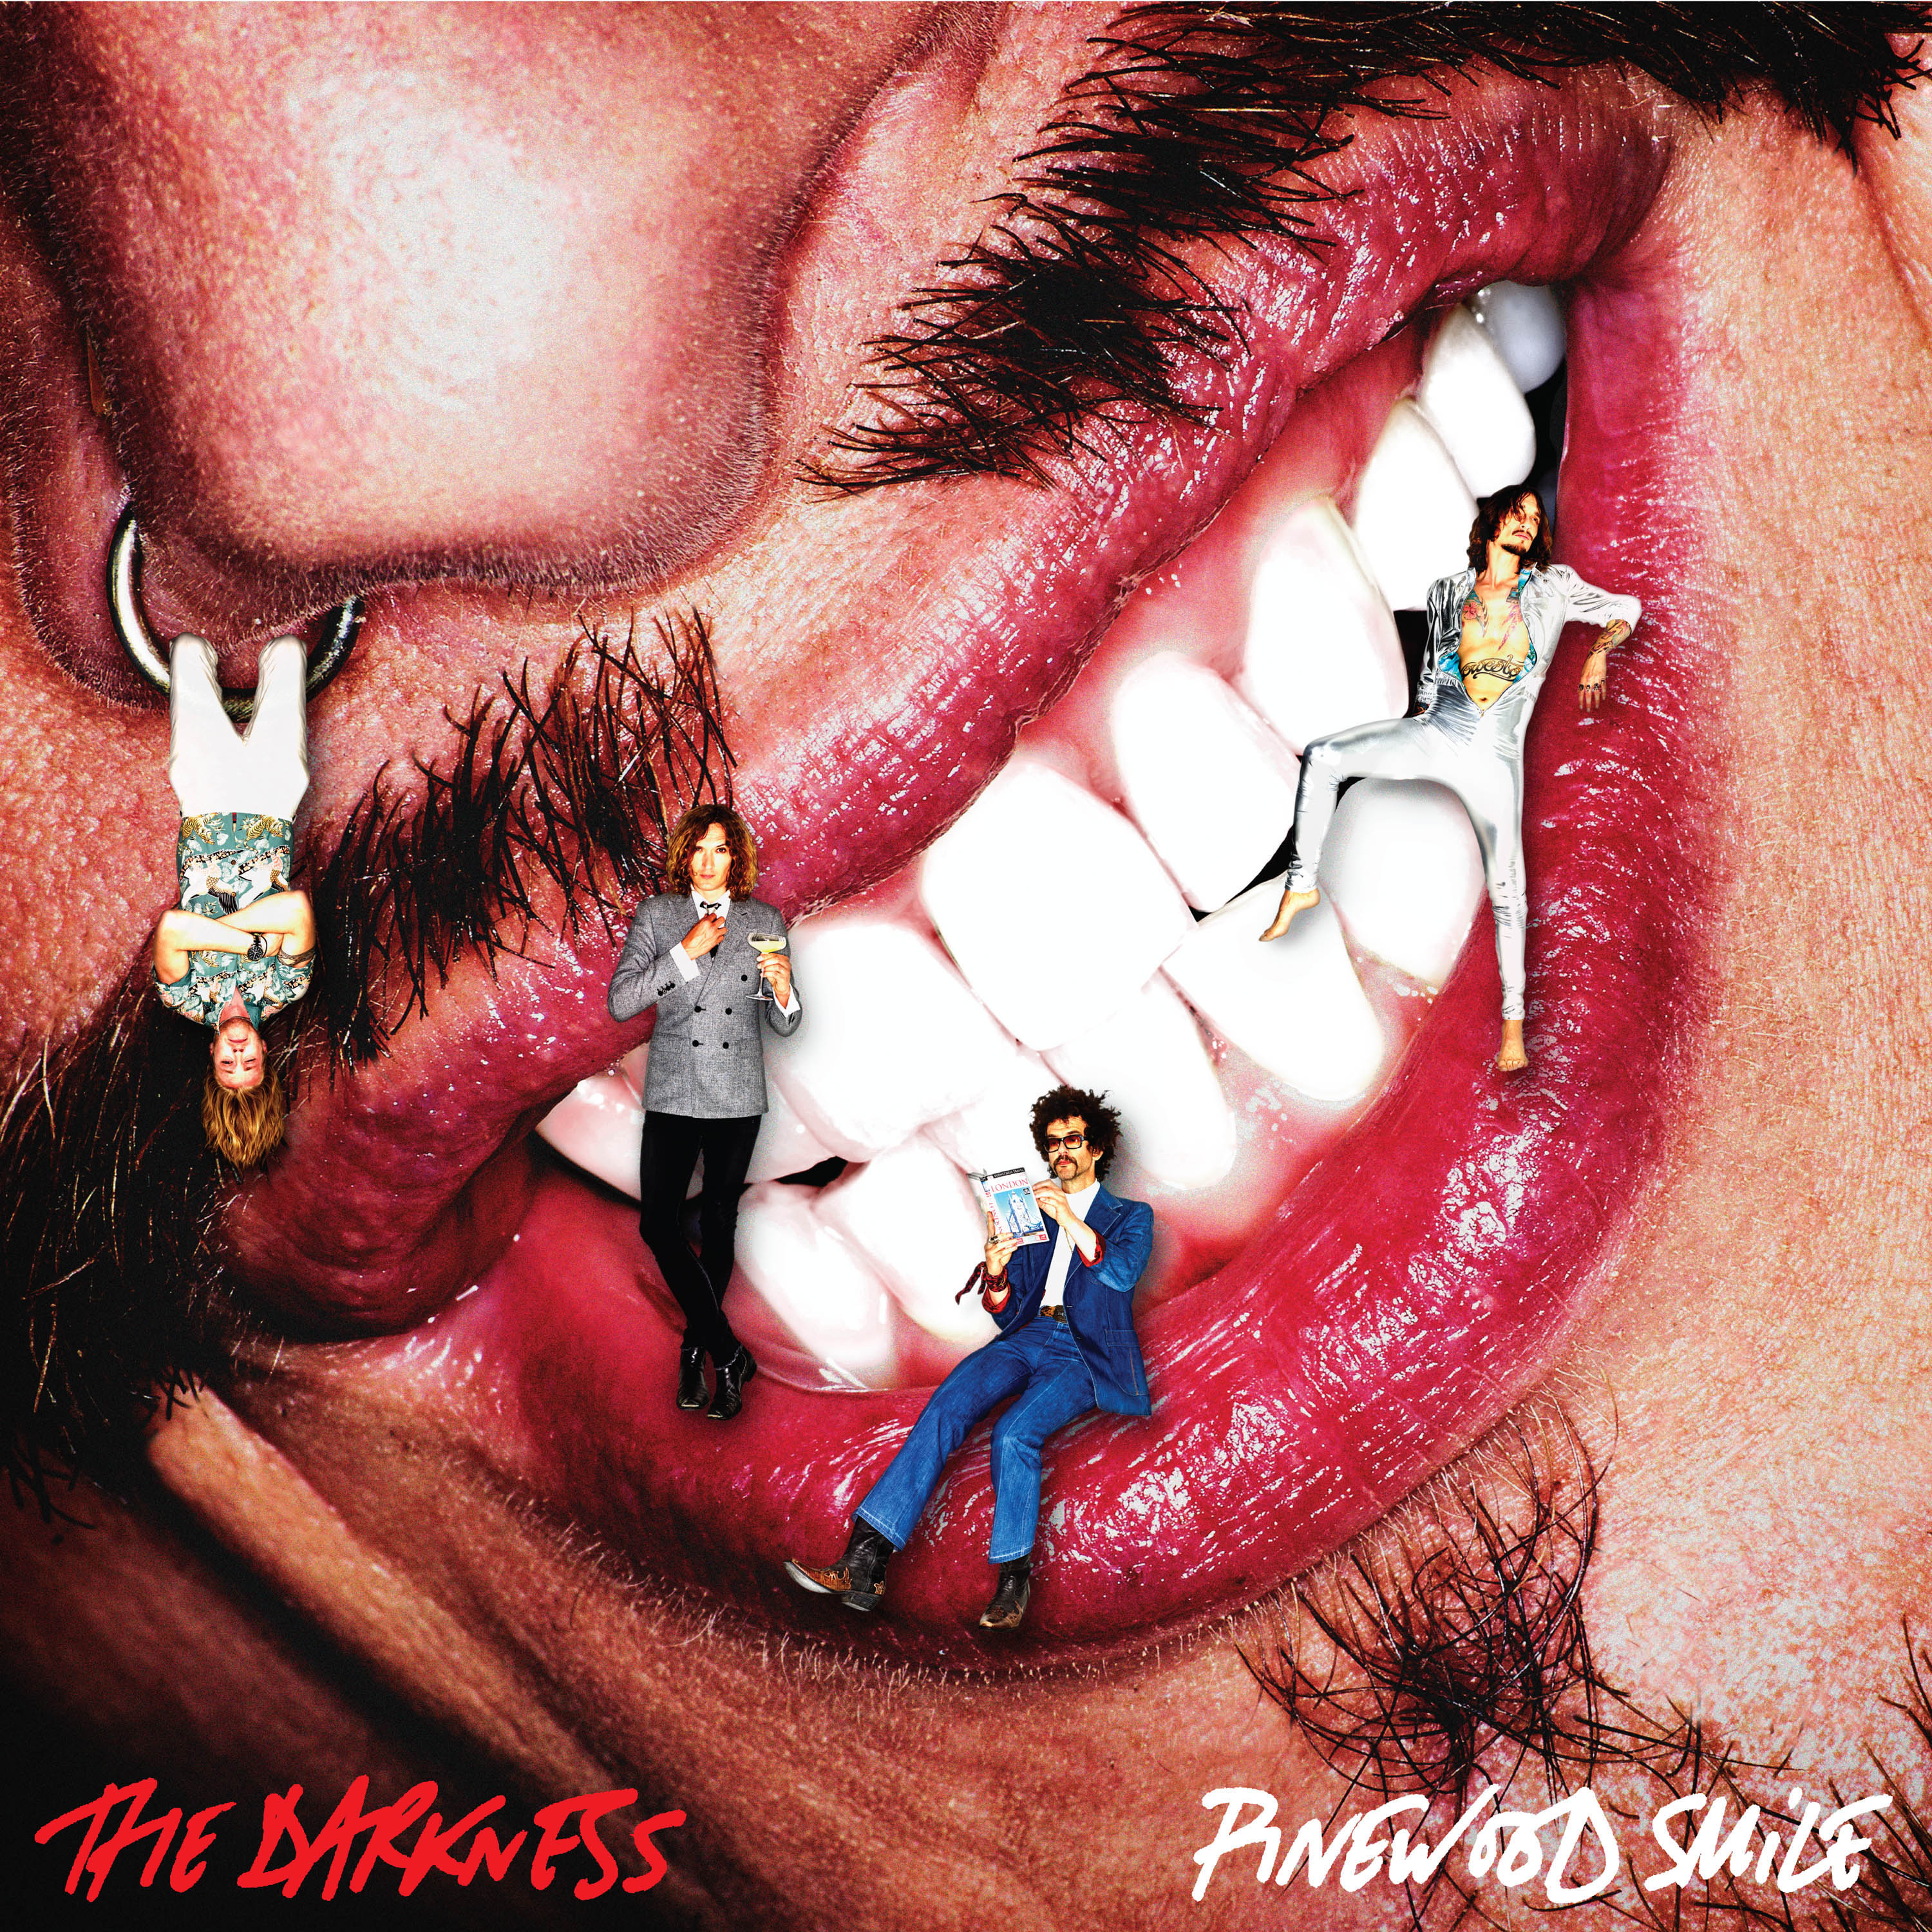 The Darkness - Pinewood Smile - CD